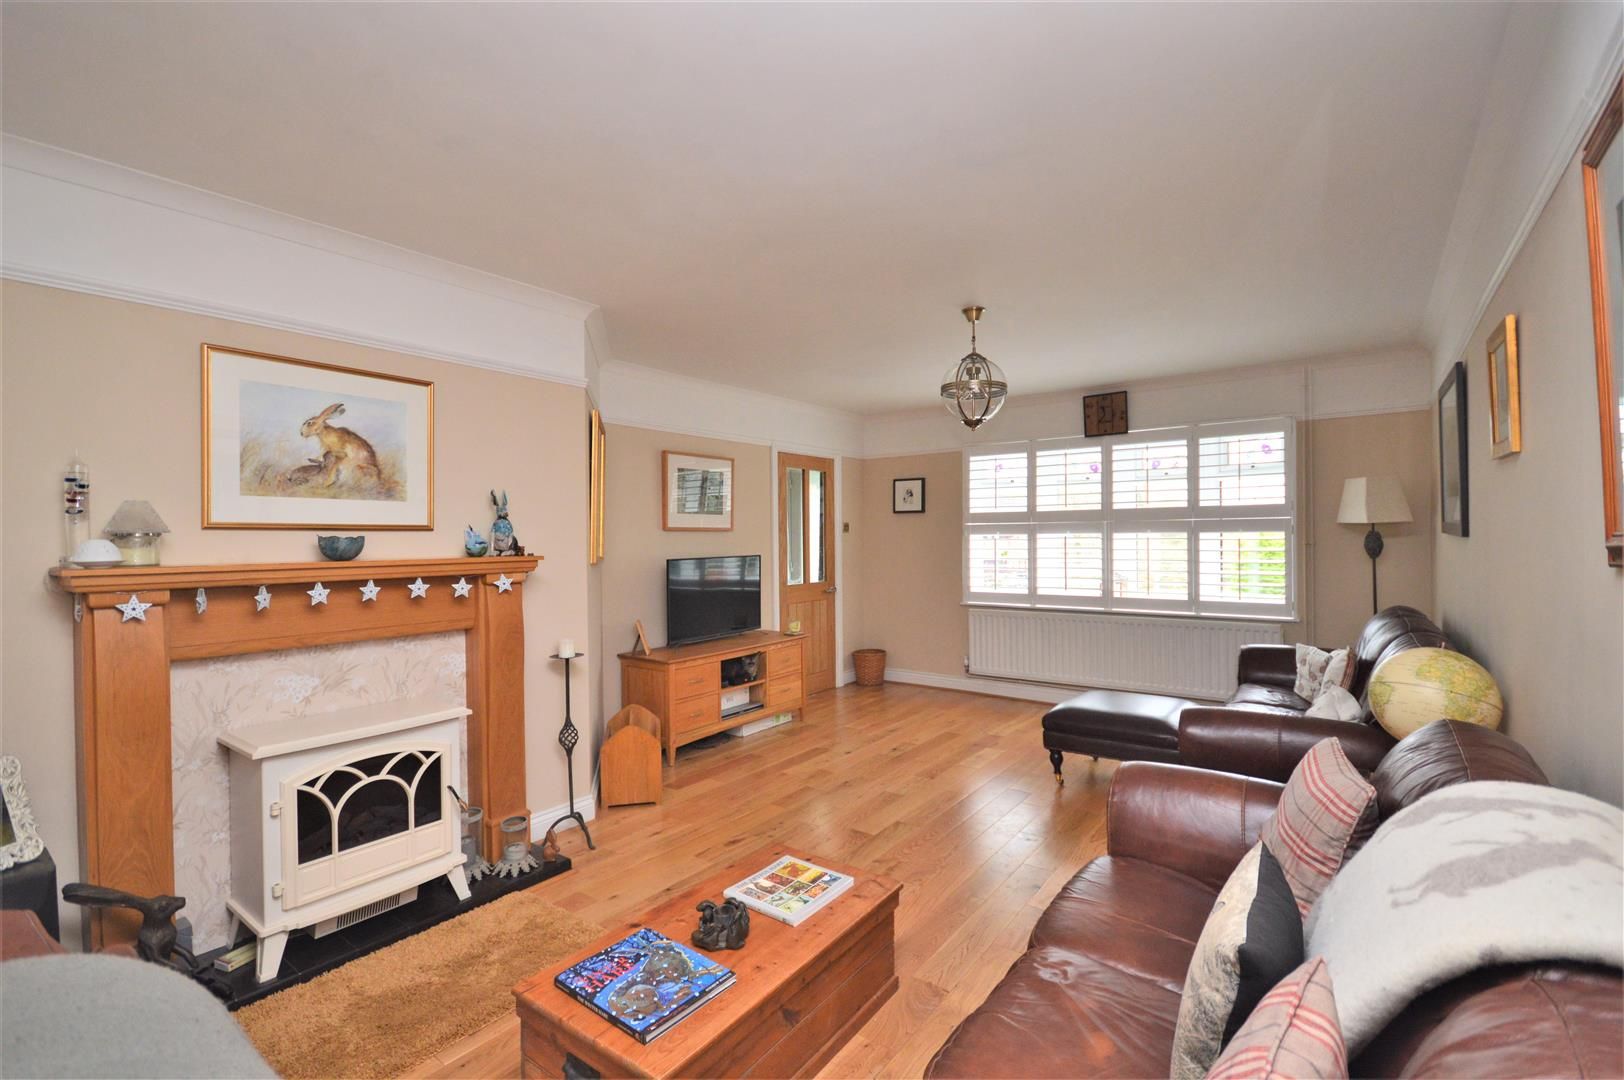 4 bed detached for sale in Kings Caple - Property Image 1